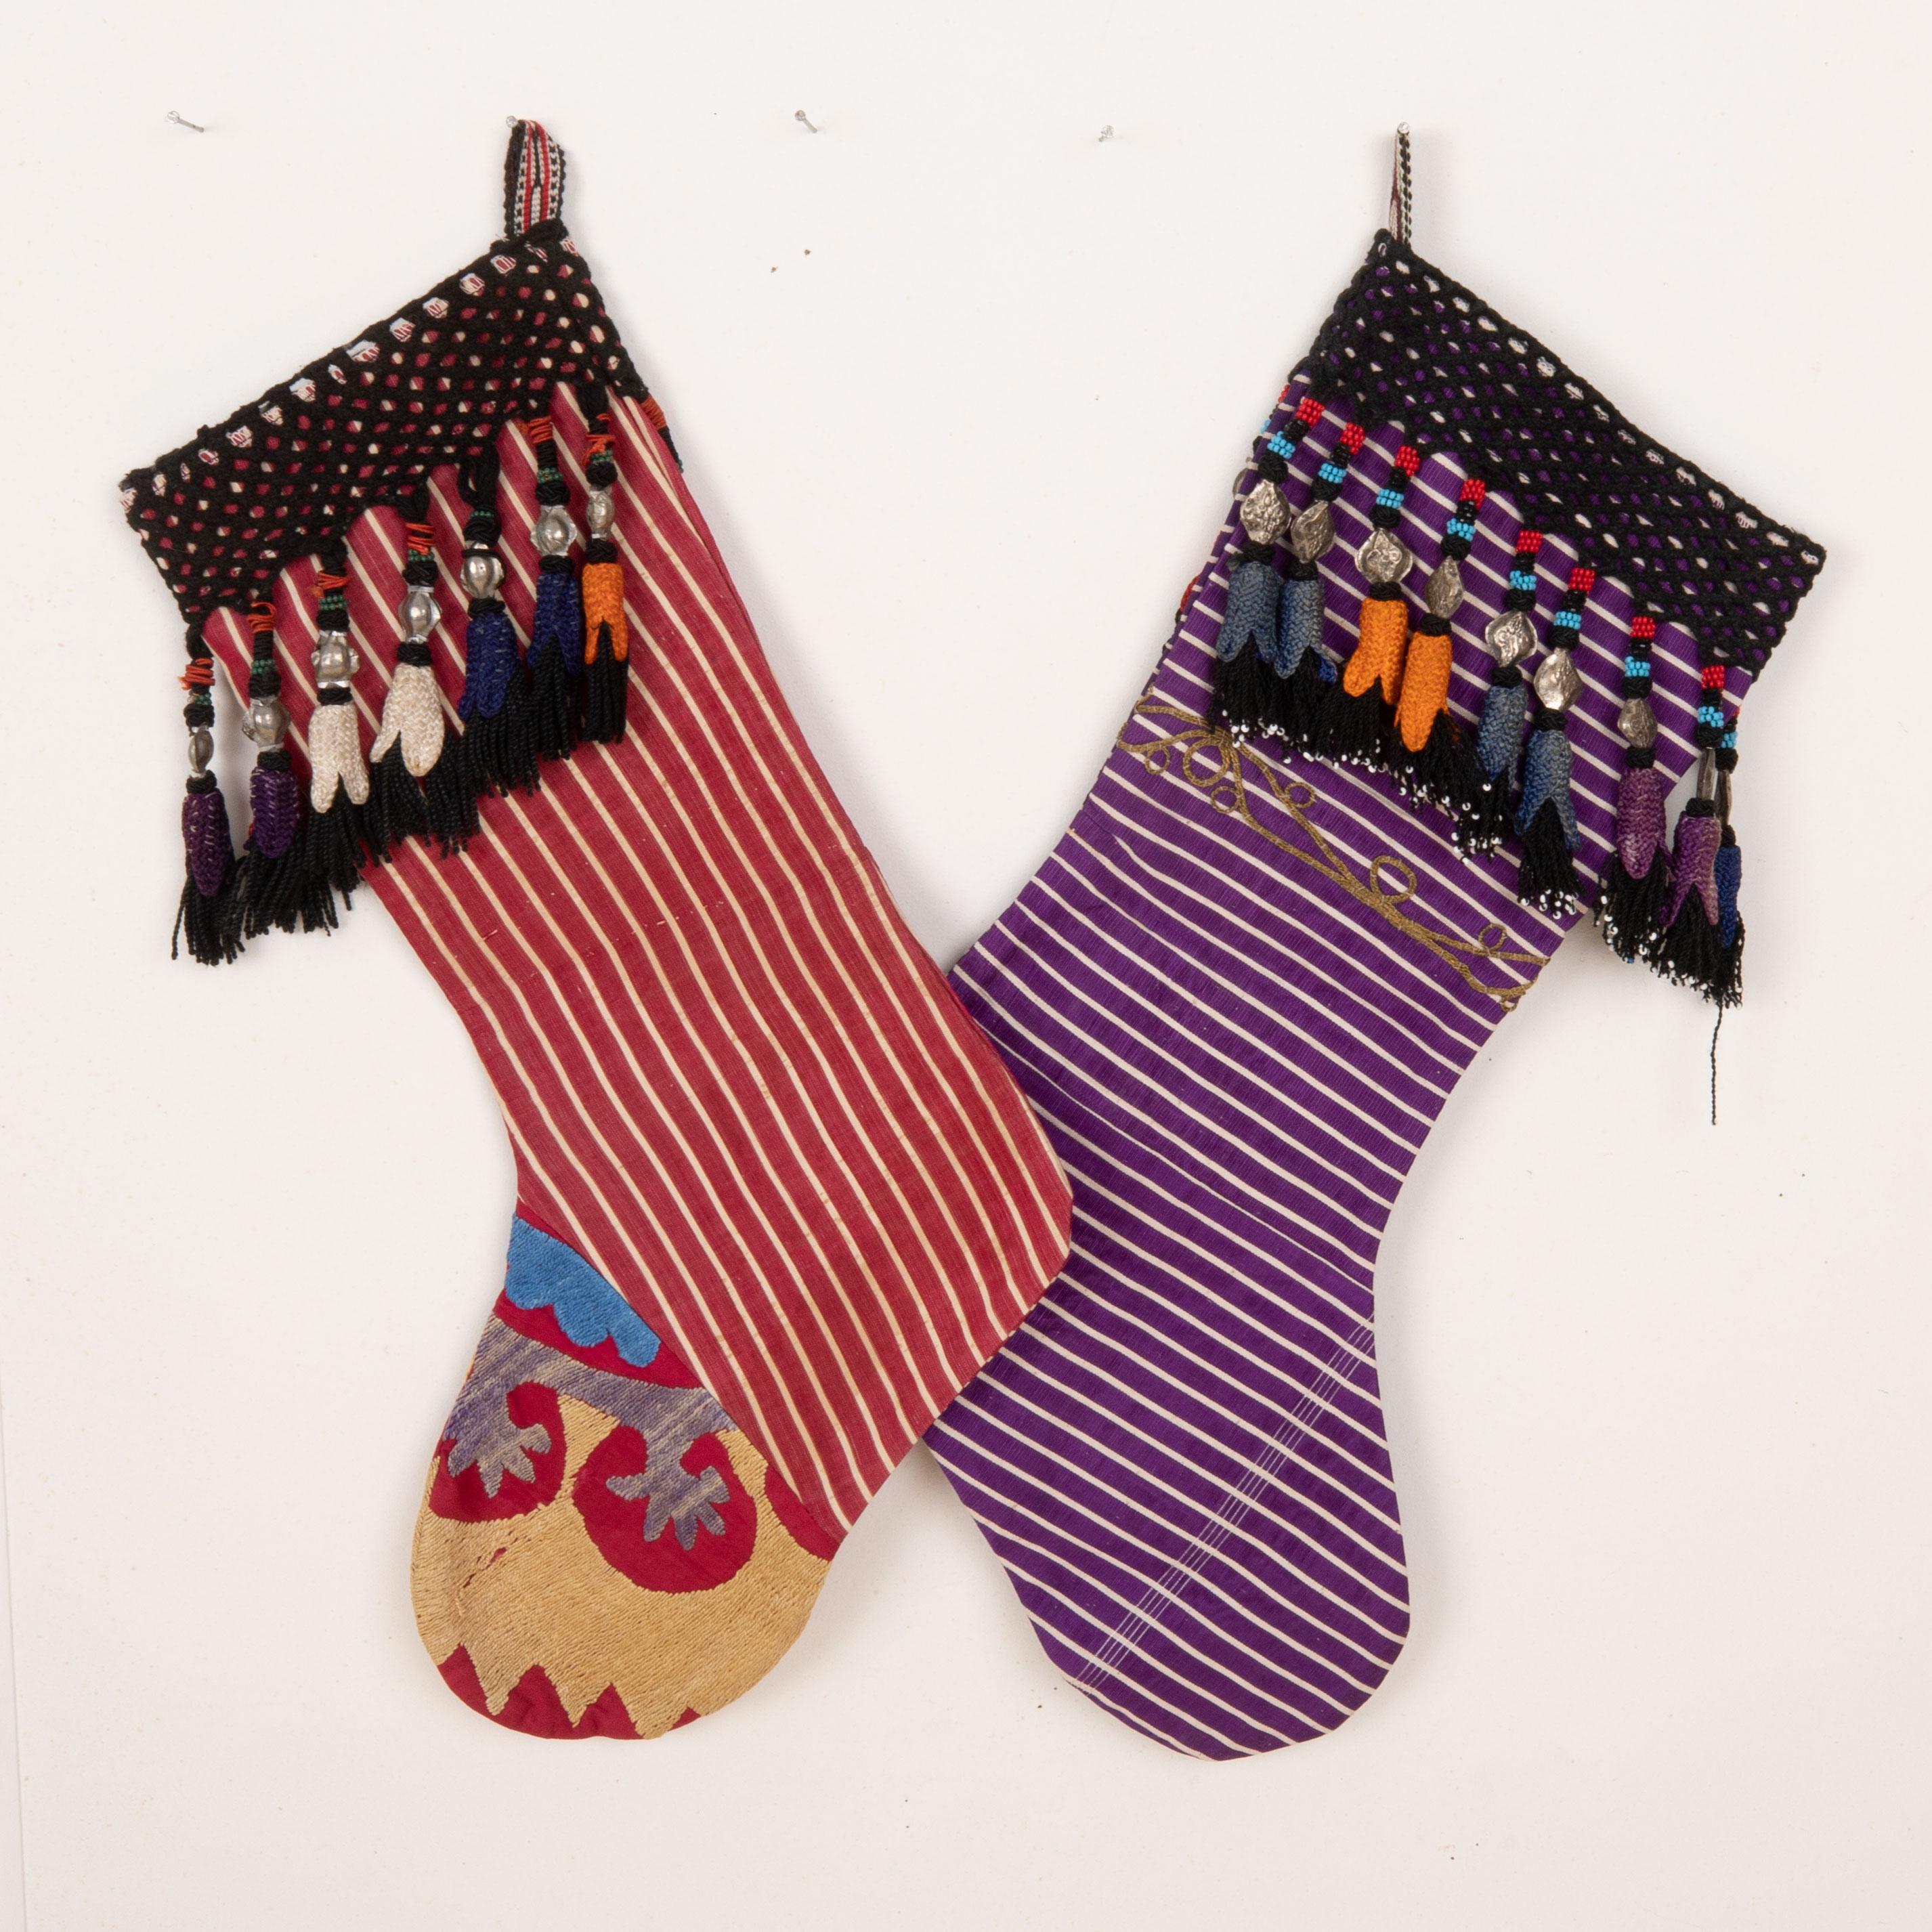 These Christmas Stockings were made from mid 20th C. Uzbek Velvet Fragments.

Please note these were made from vintage Turkish and Uzbek Textile fragments.
